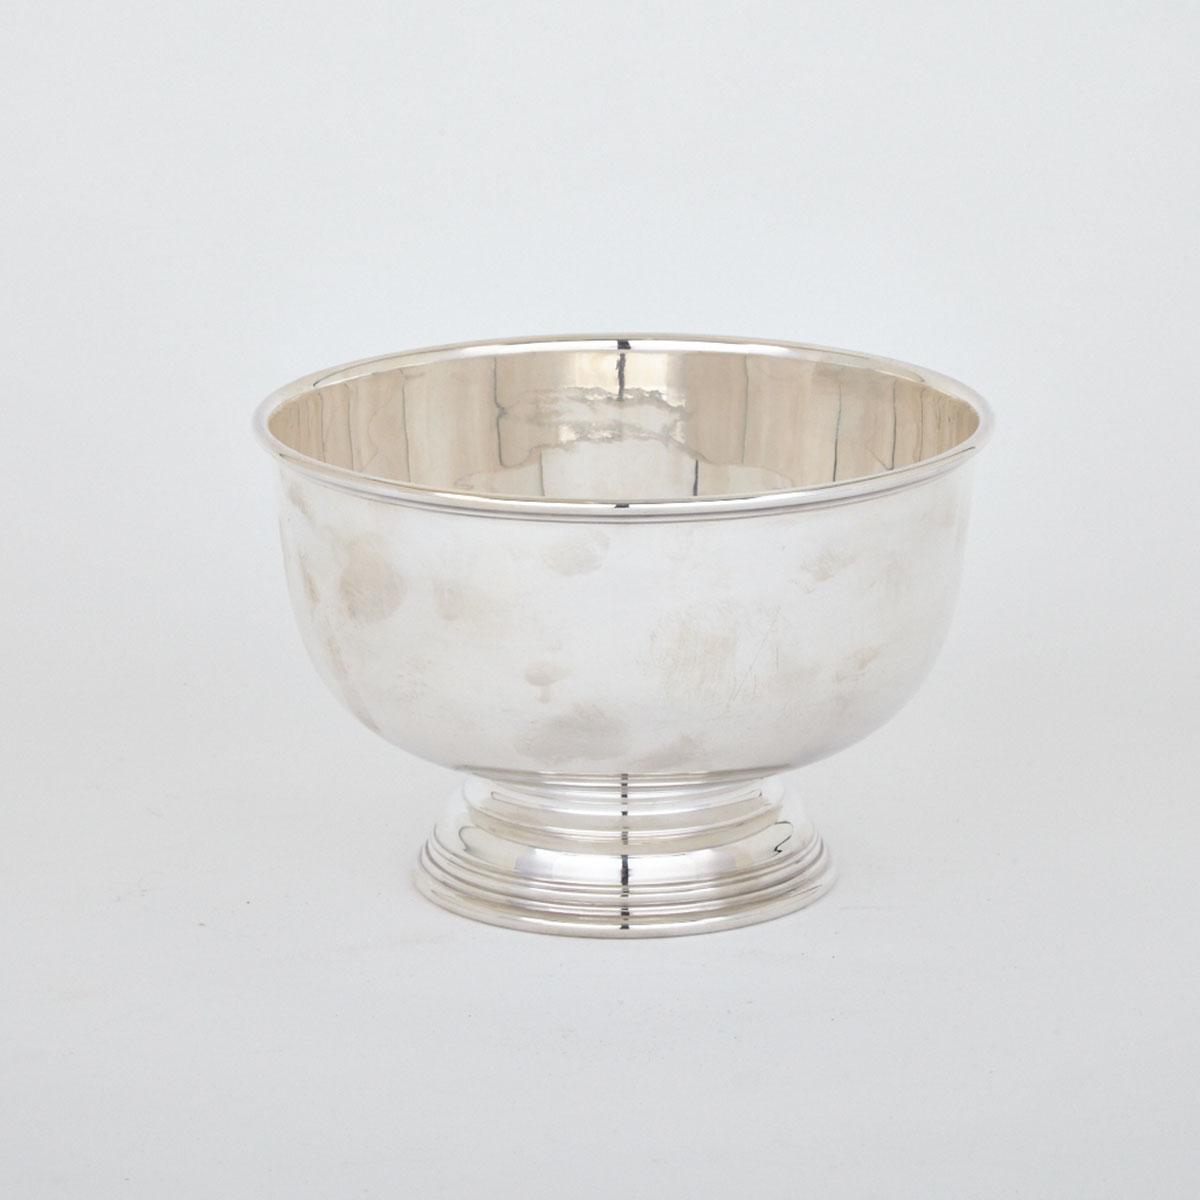 Sterling Silver Bowl, probably Canadian, mid-20th century